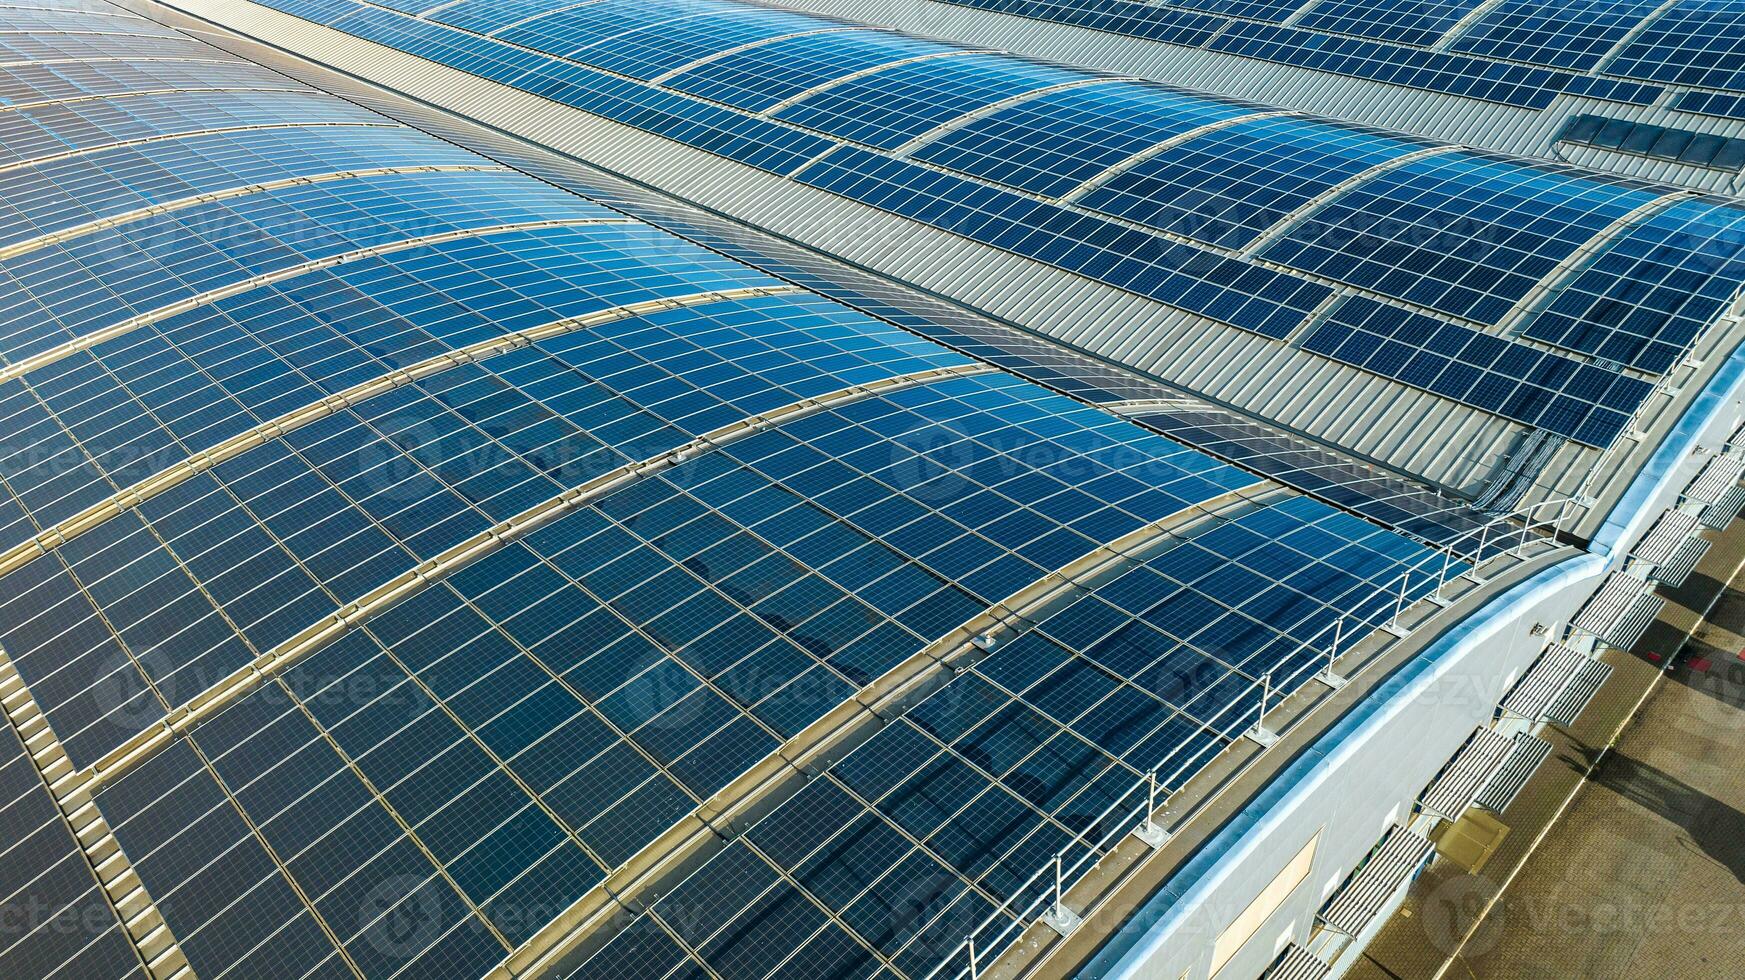 Large solar panels on roofs of industrial units and warehouses photo